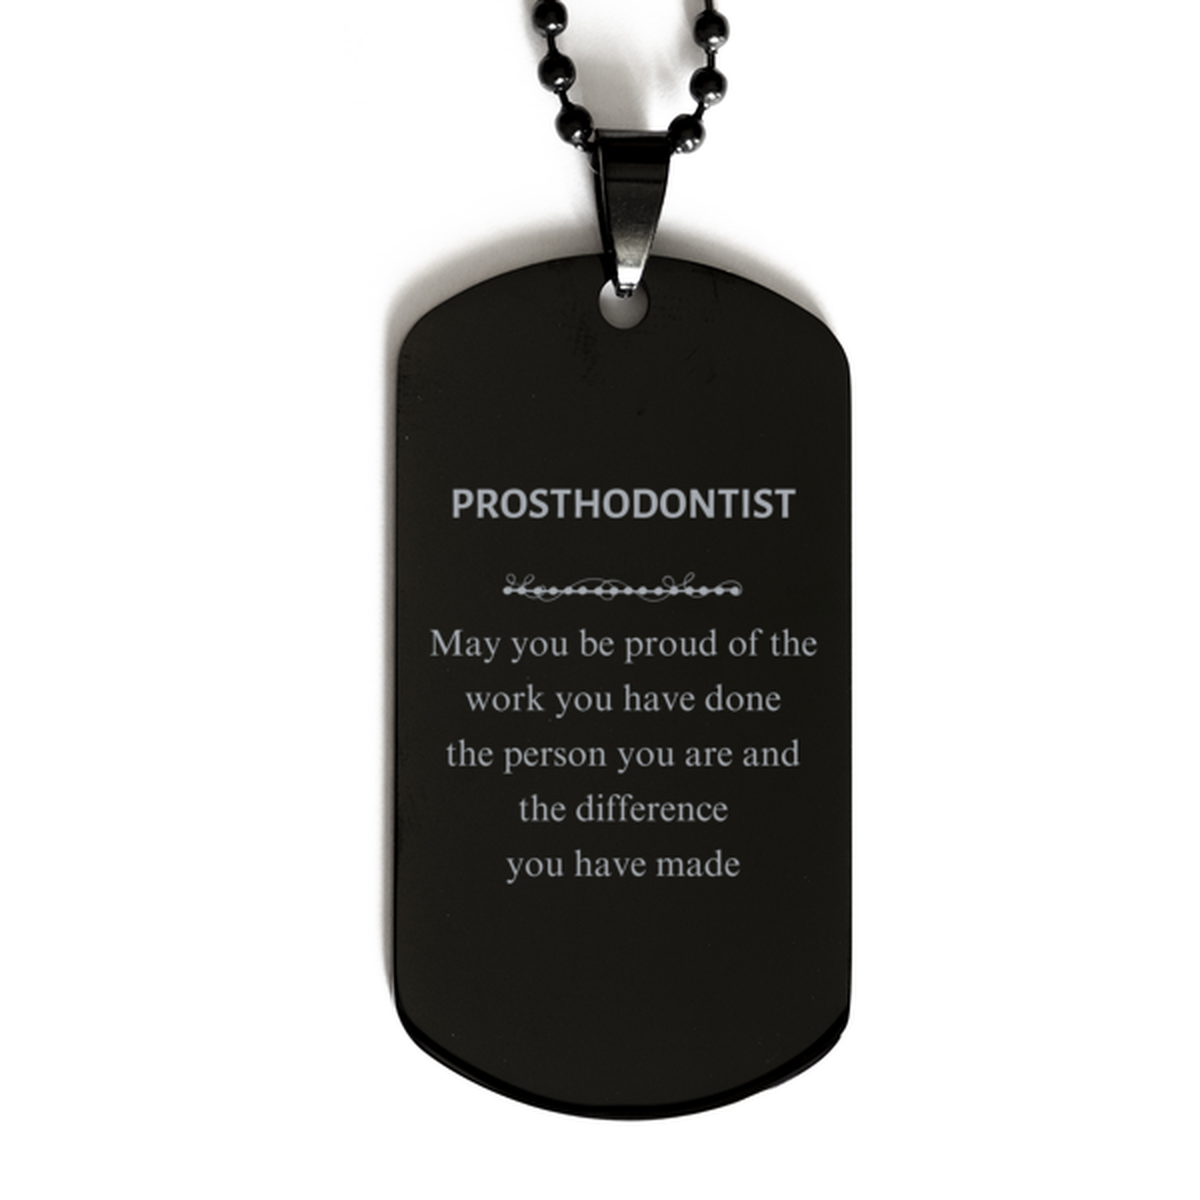 Prosthodontist May you be proud of the work you have done, Retirement Prosthodontist Black Dog Tag for Colleague Appreciation Gifts Amazing for Prosthodontist